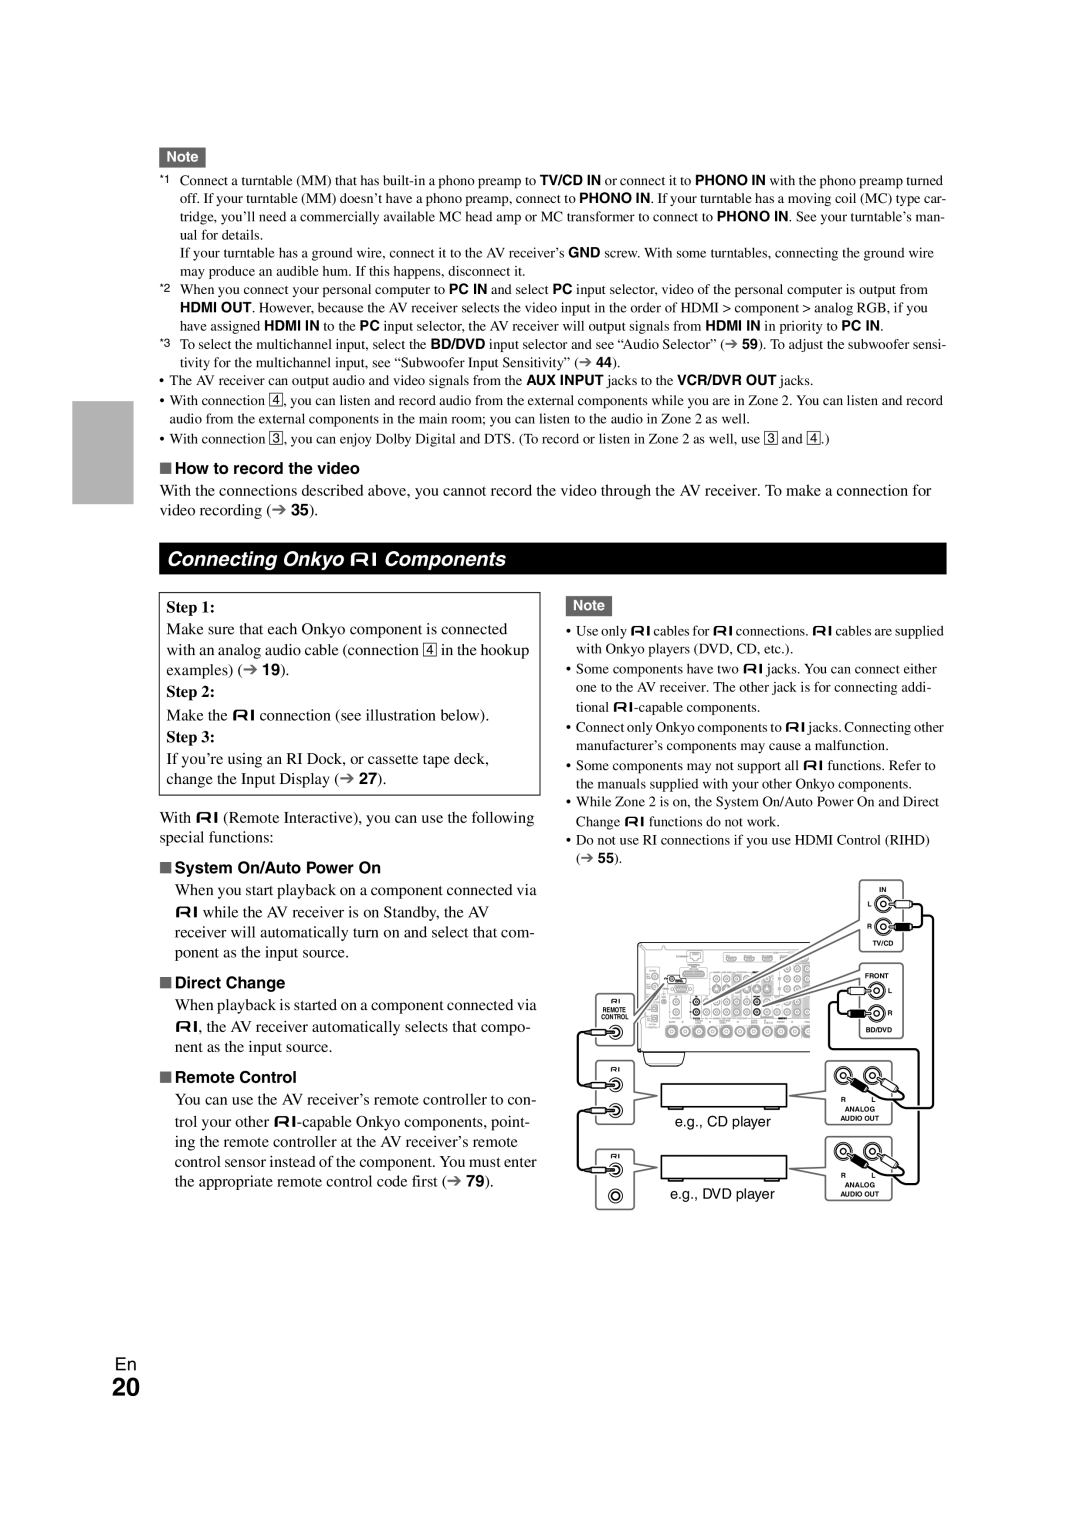 Onkyo TX-NR708 instruction manual Connecting Onkyo uComponents, How to record the video, Direct Change, Remote Control 